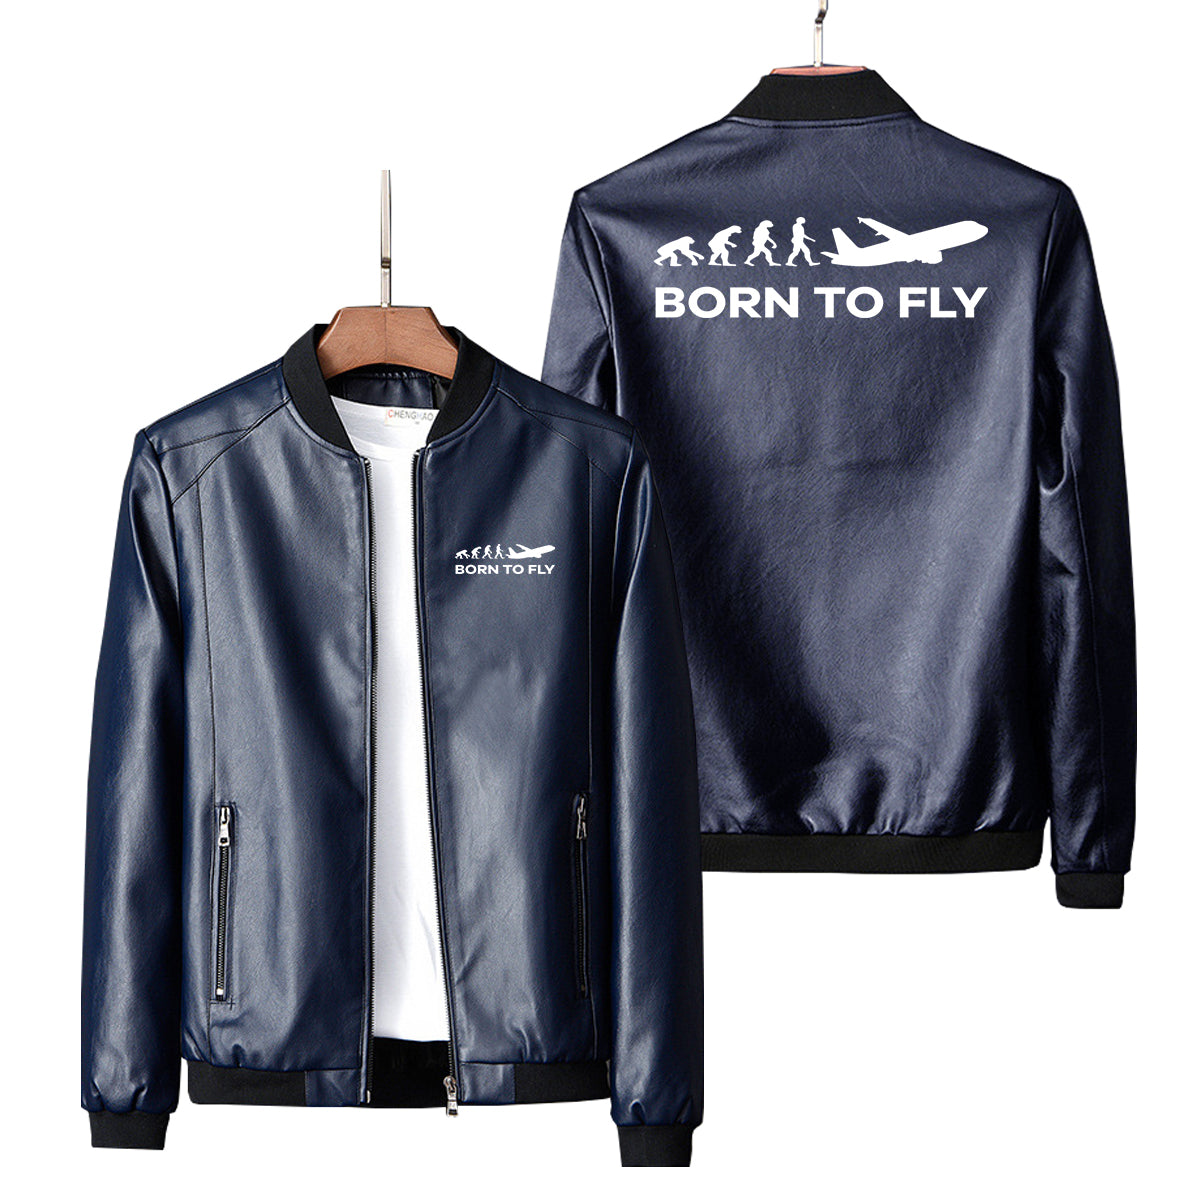 Born To Fly Designed PU Leather Jackets